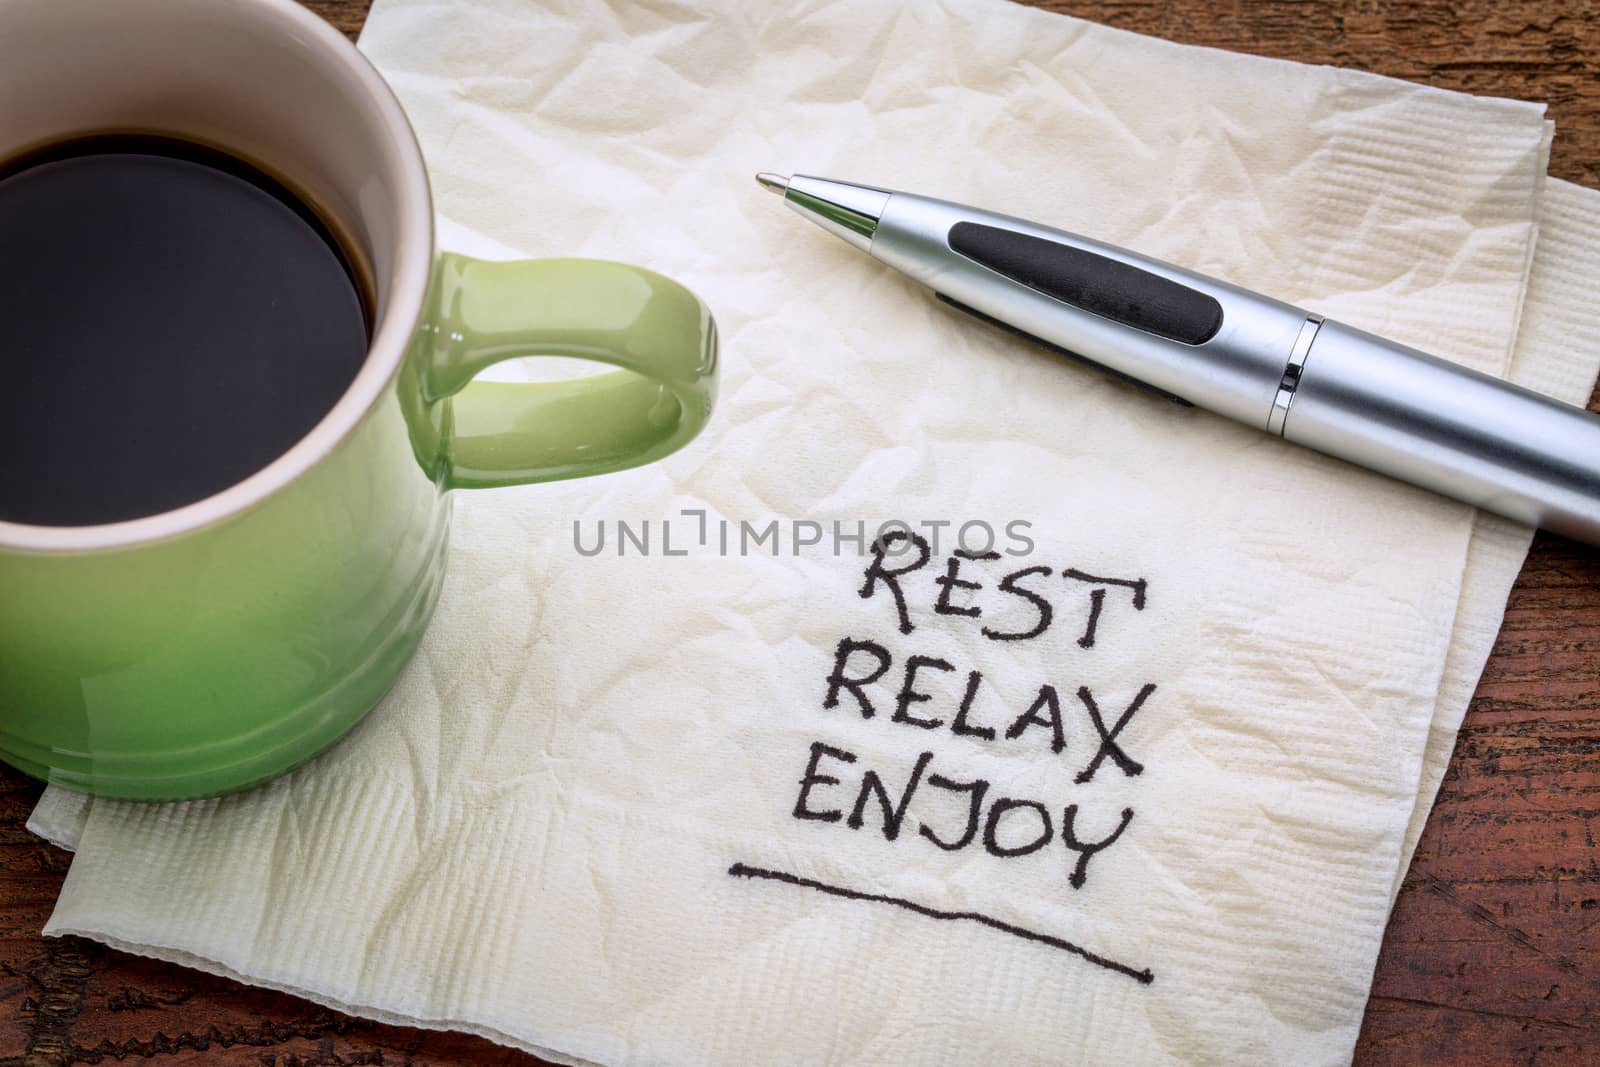 rest, relax, enjoy - handwriting on a napkin with a cup of coffee